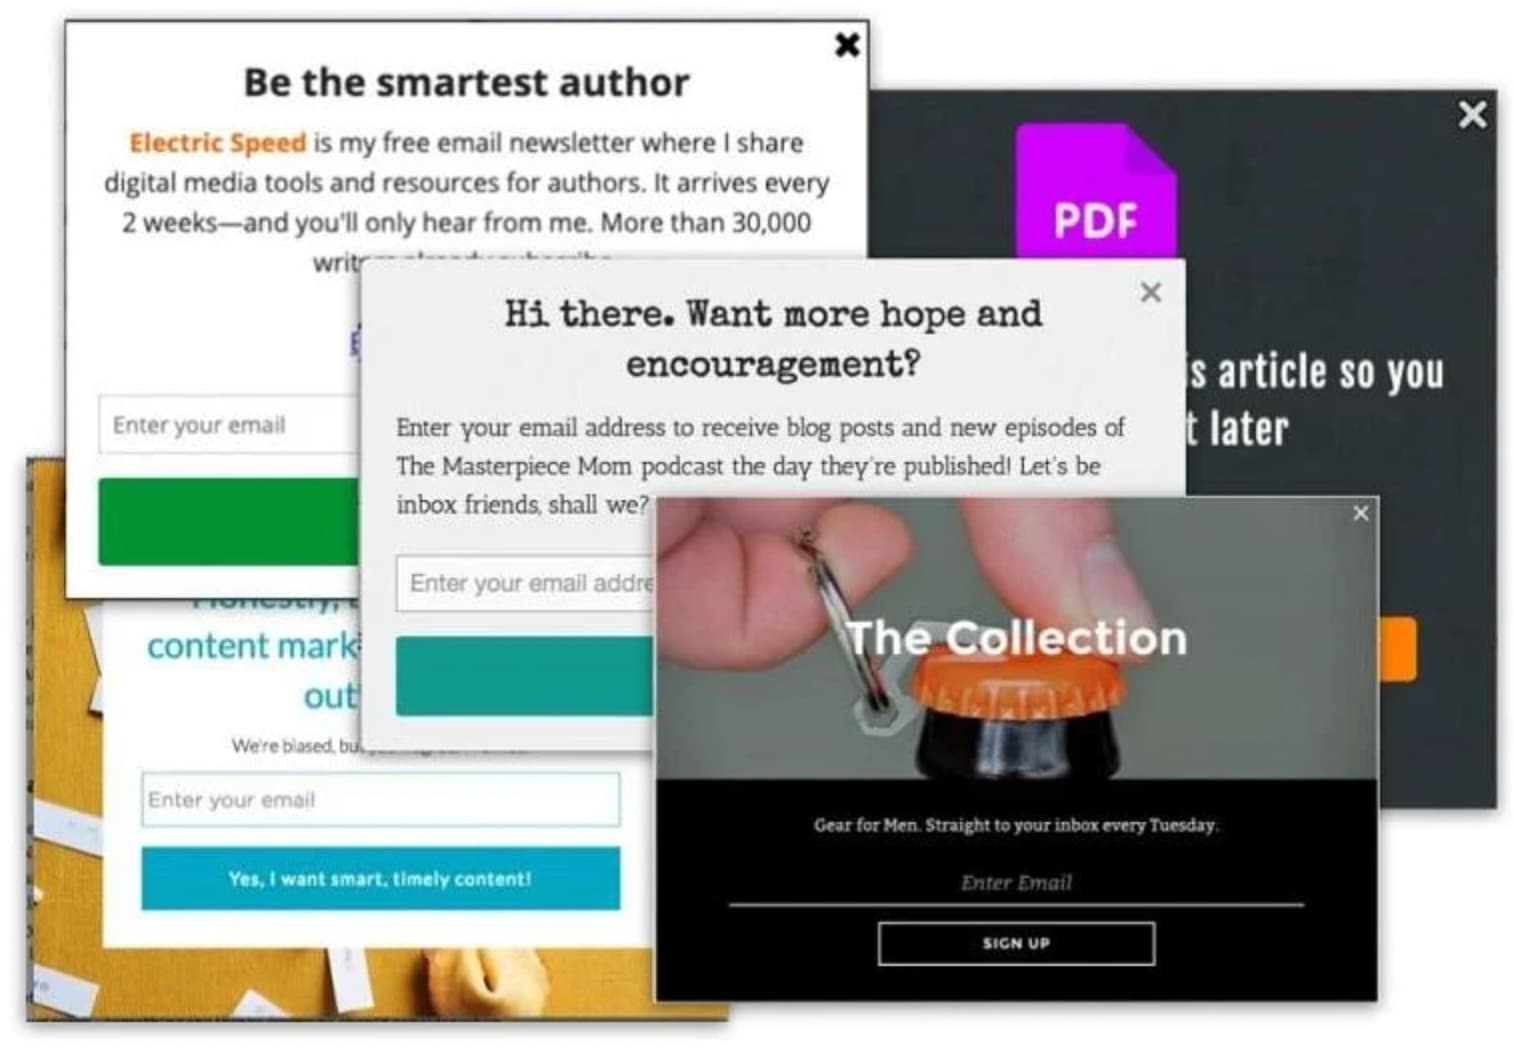 pop up advertisement - Be the smartest author Electric Speed is my free email newsletter where I digital media tools and resources for authors. It arrives every 2 weeksand you'll only hear from me. More than 30,000 Enter your email writ content mark out W